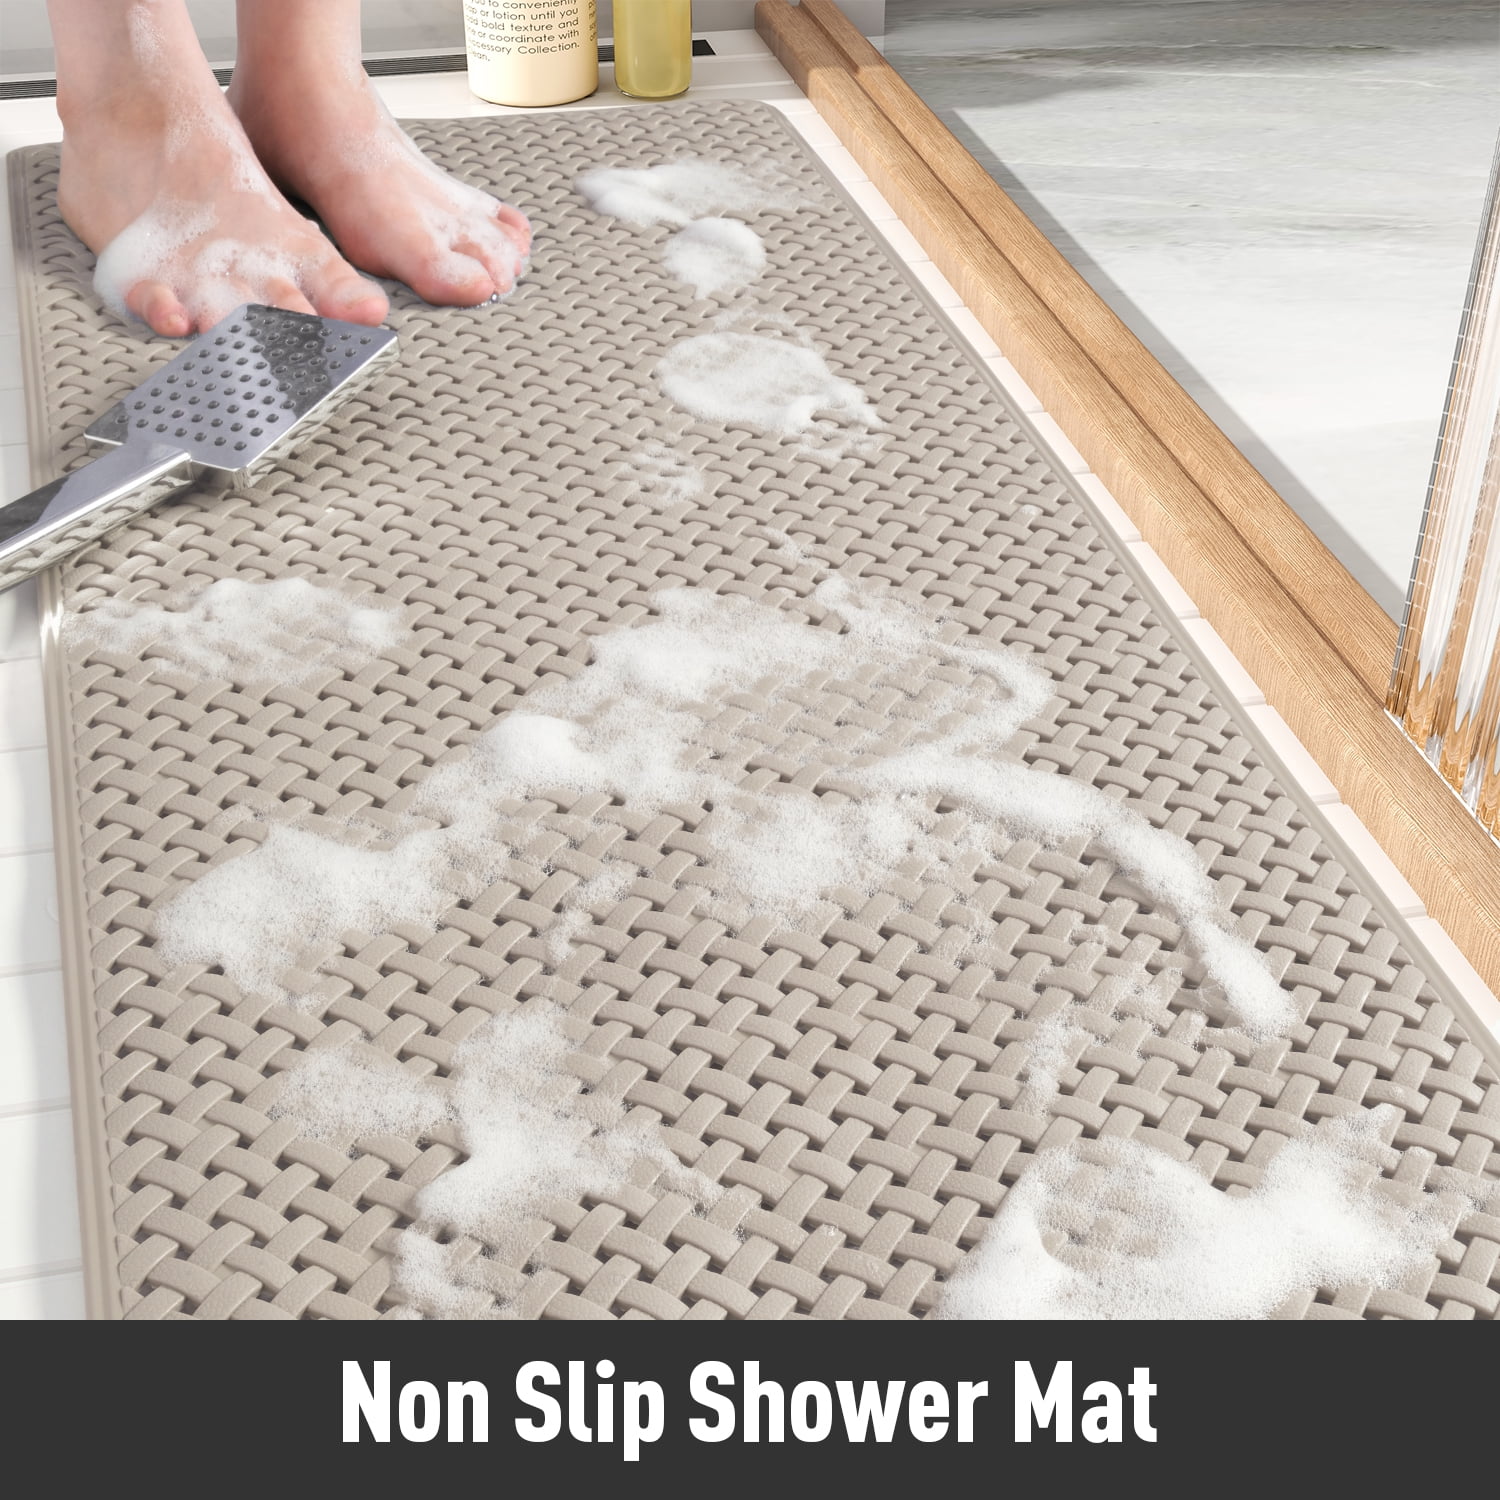 Bathtub and Shower Mat, Non Slip, Machine Washable, Woven Design, Perfect Bath  Mat for Tub and Shower for Kids and Elderly, 28 X16 Inch 